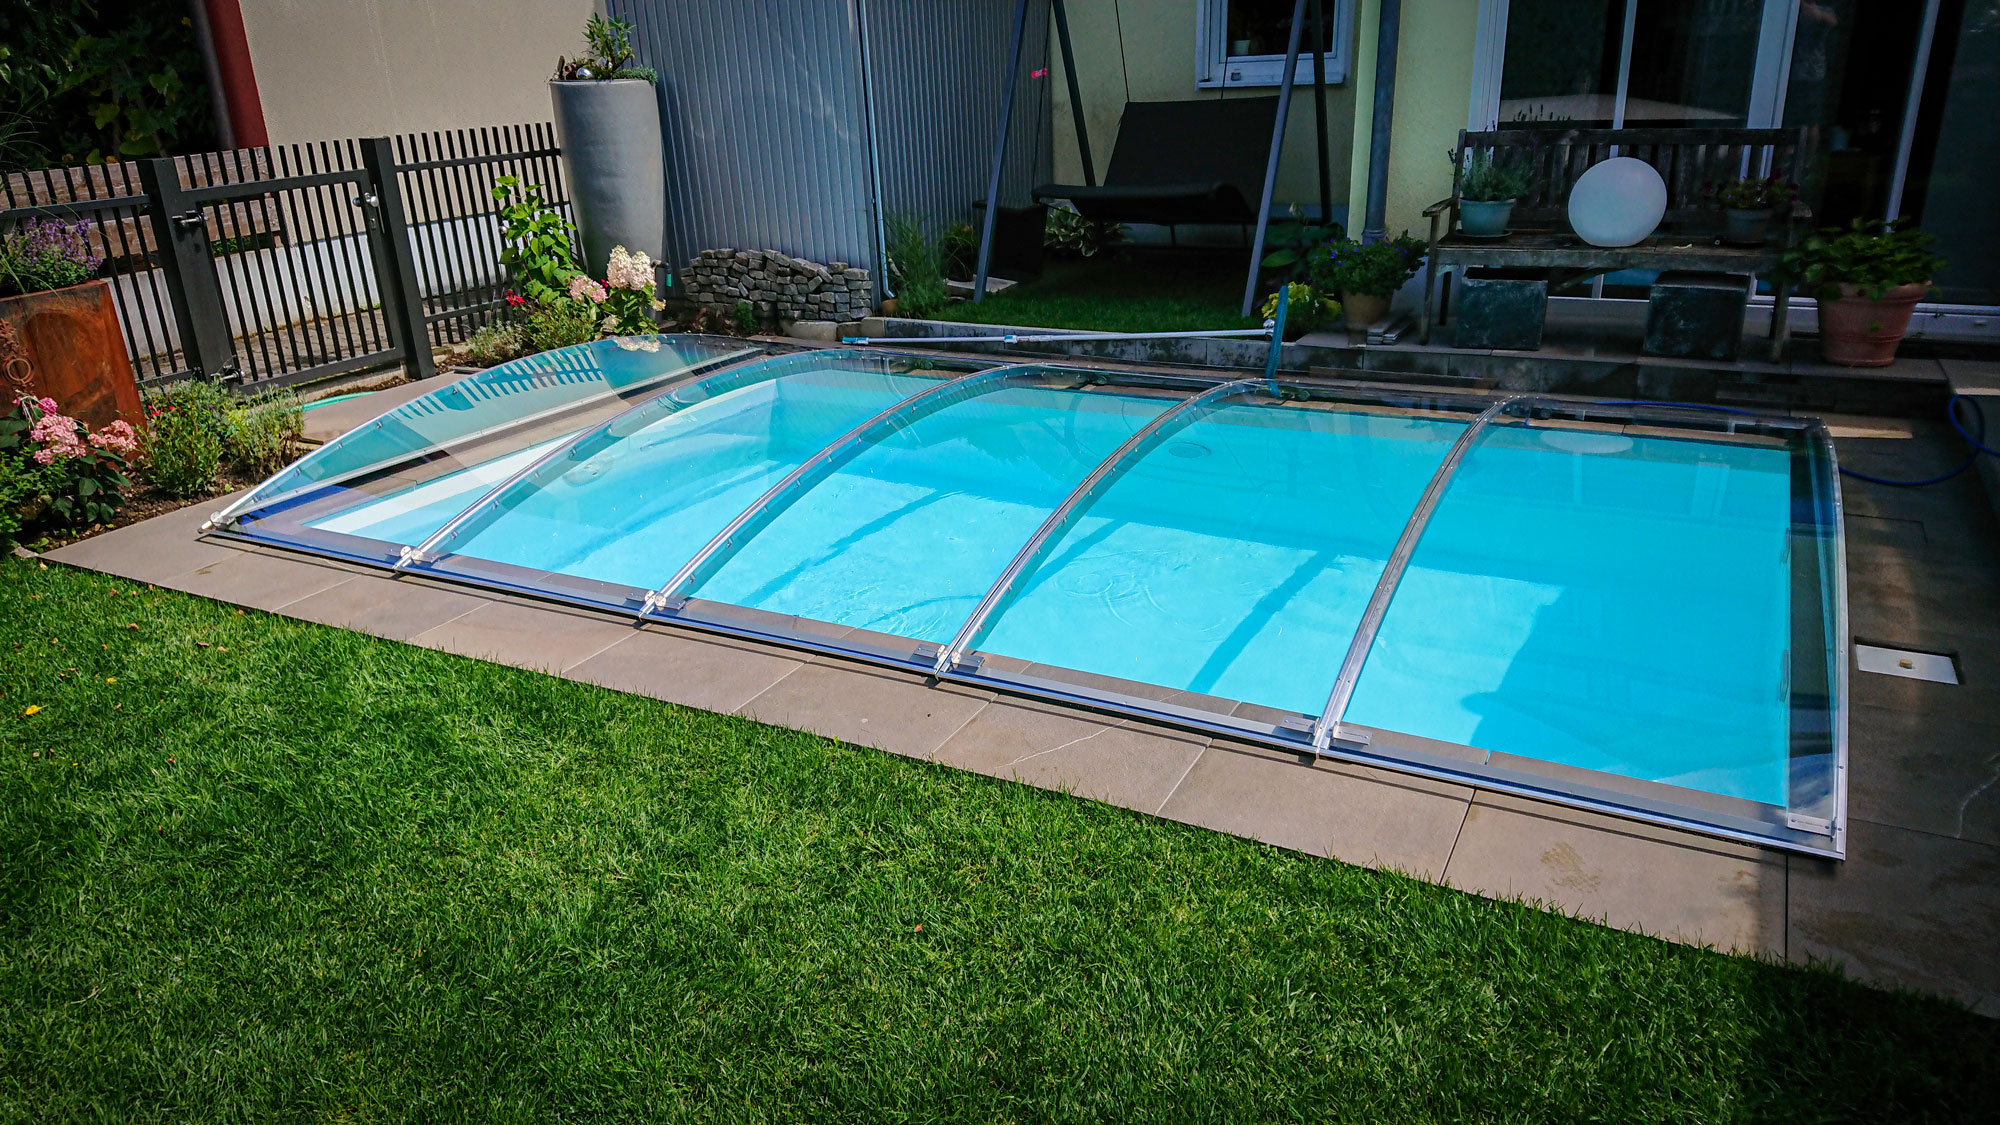 Innovative pool cover for your outdoor area - FlexiRoof